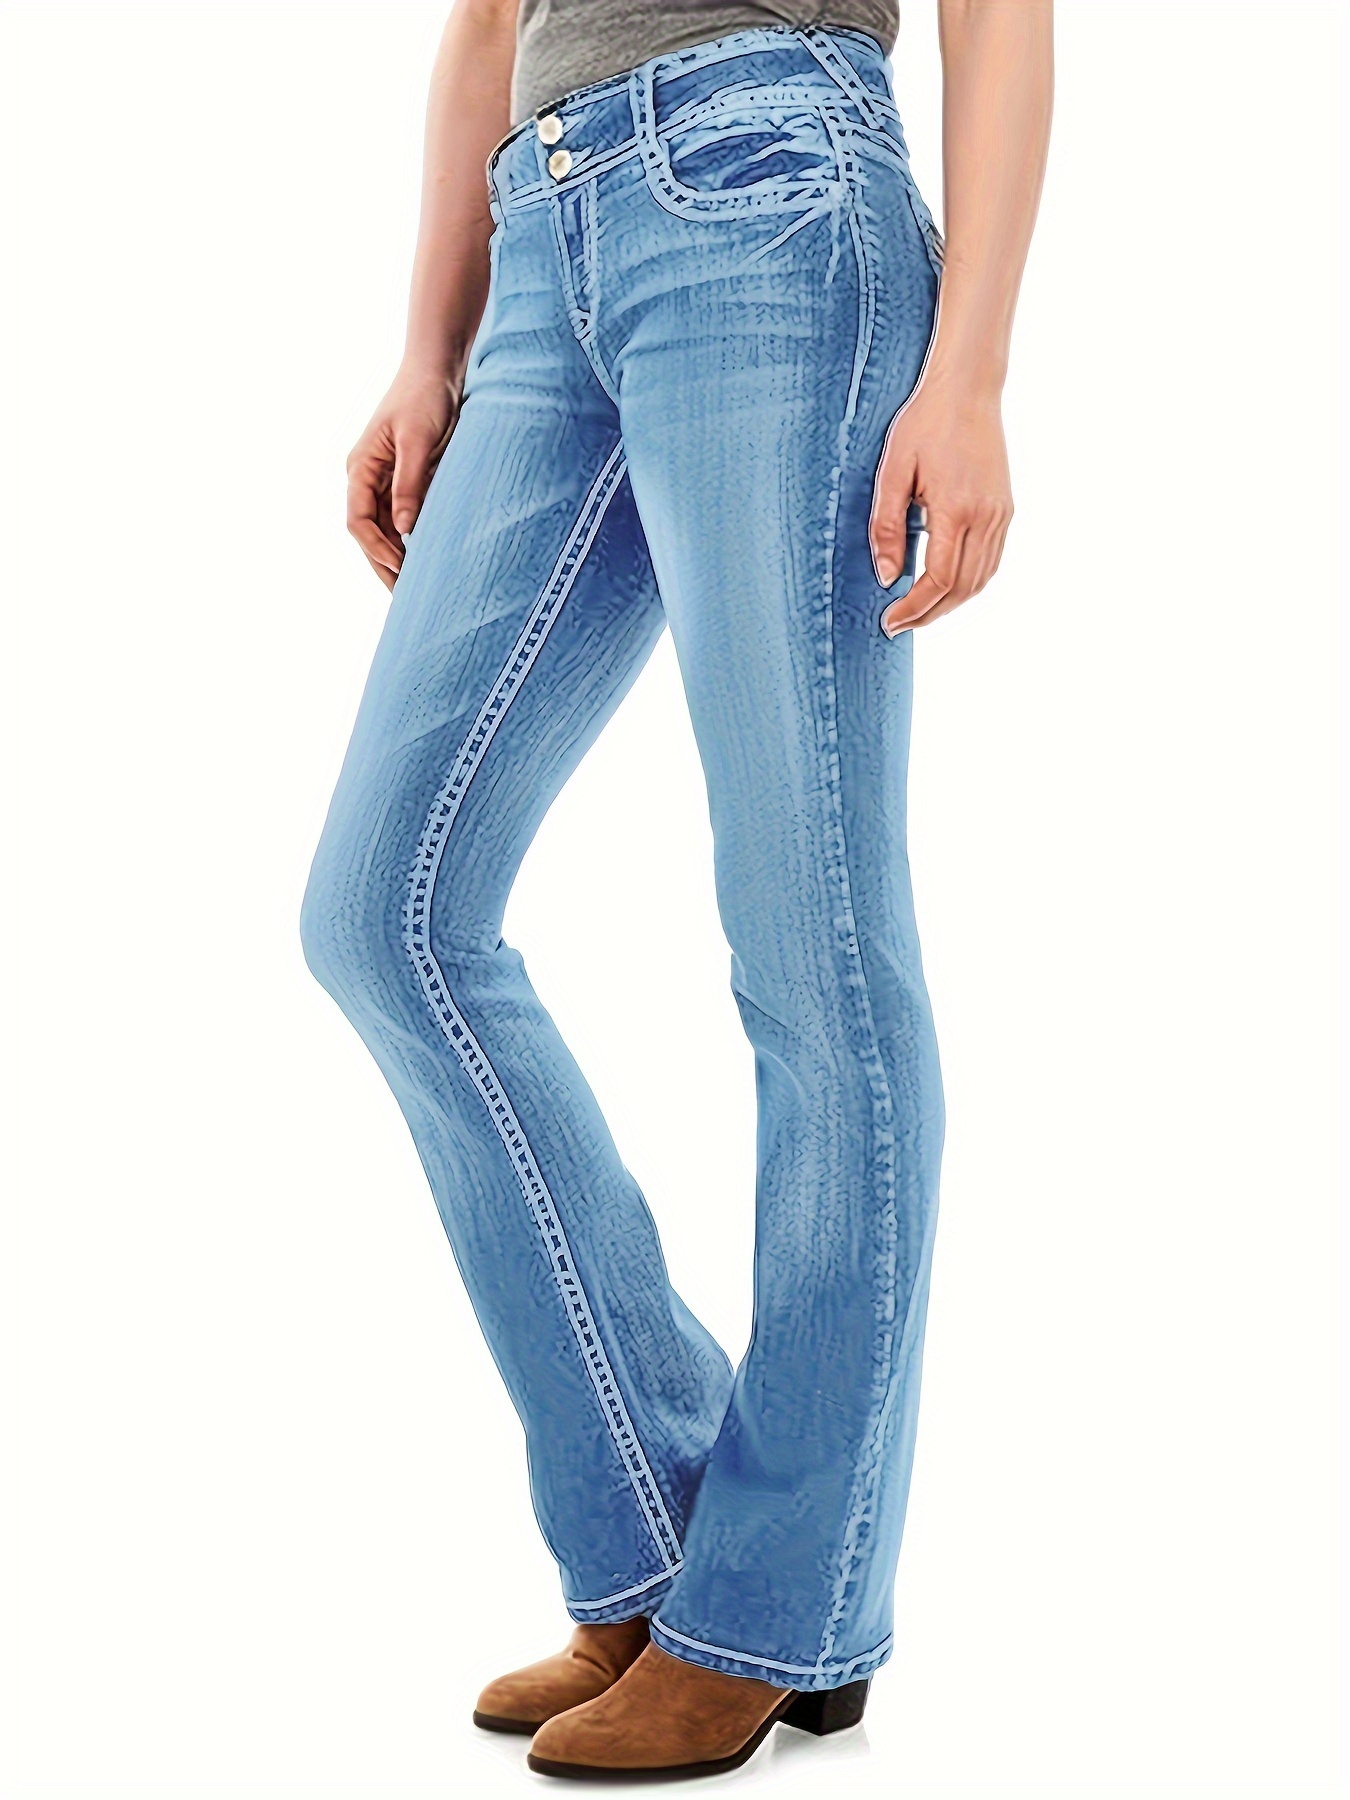 Becca Stretchy Mid Rise Bootcut Jeans